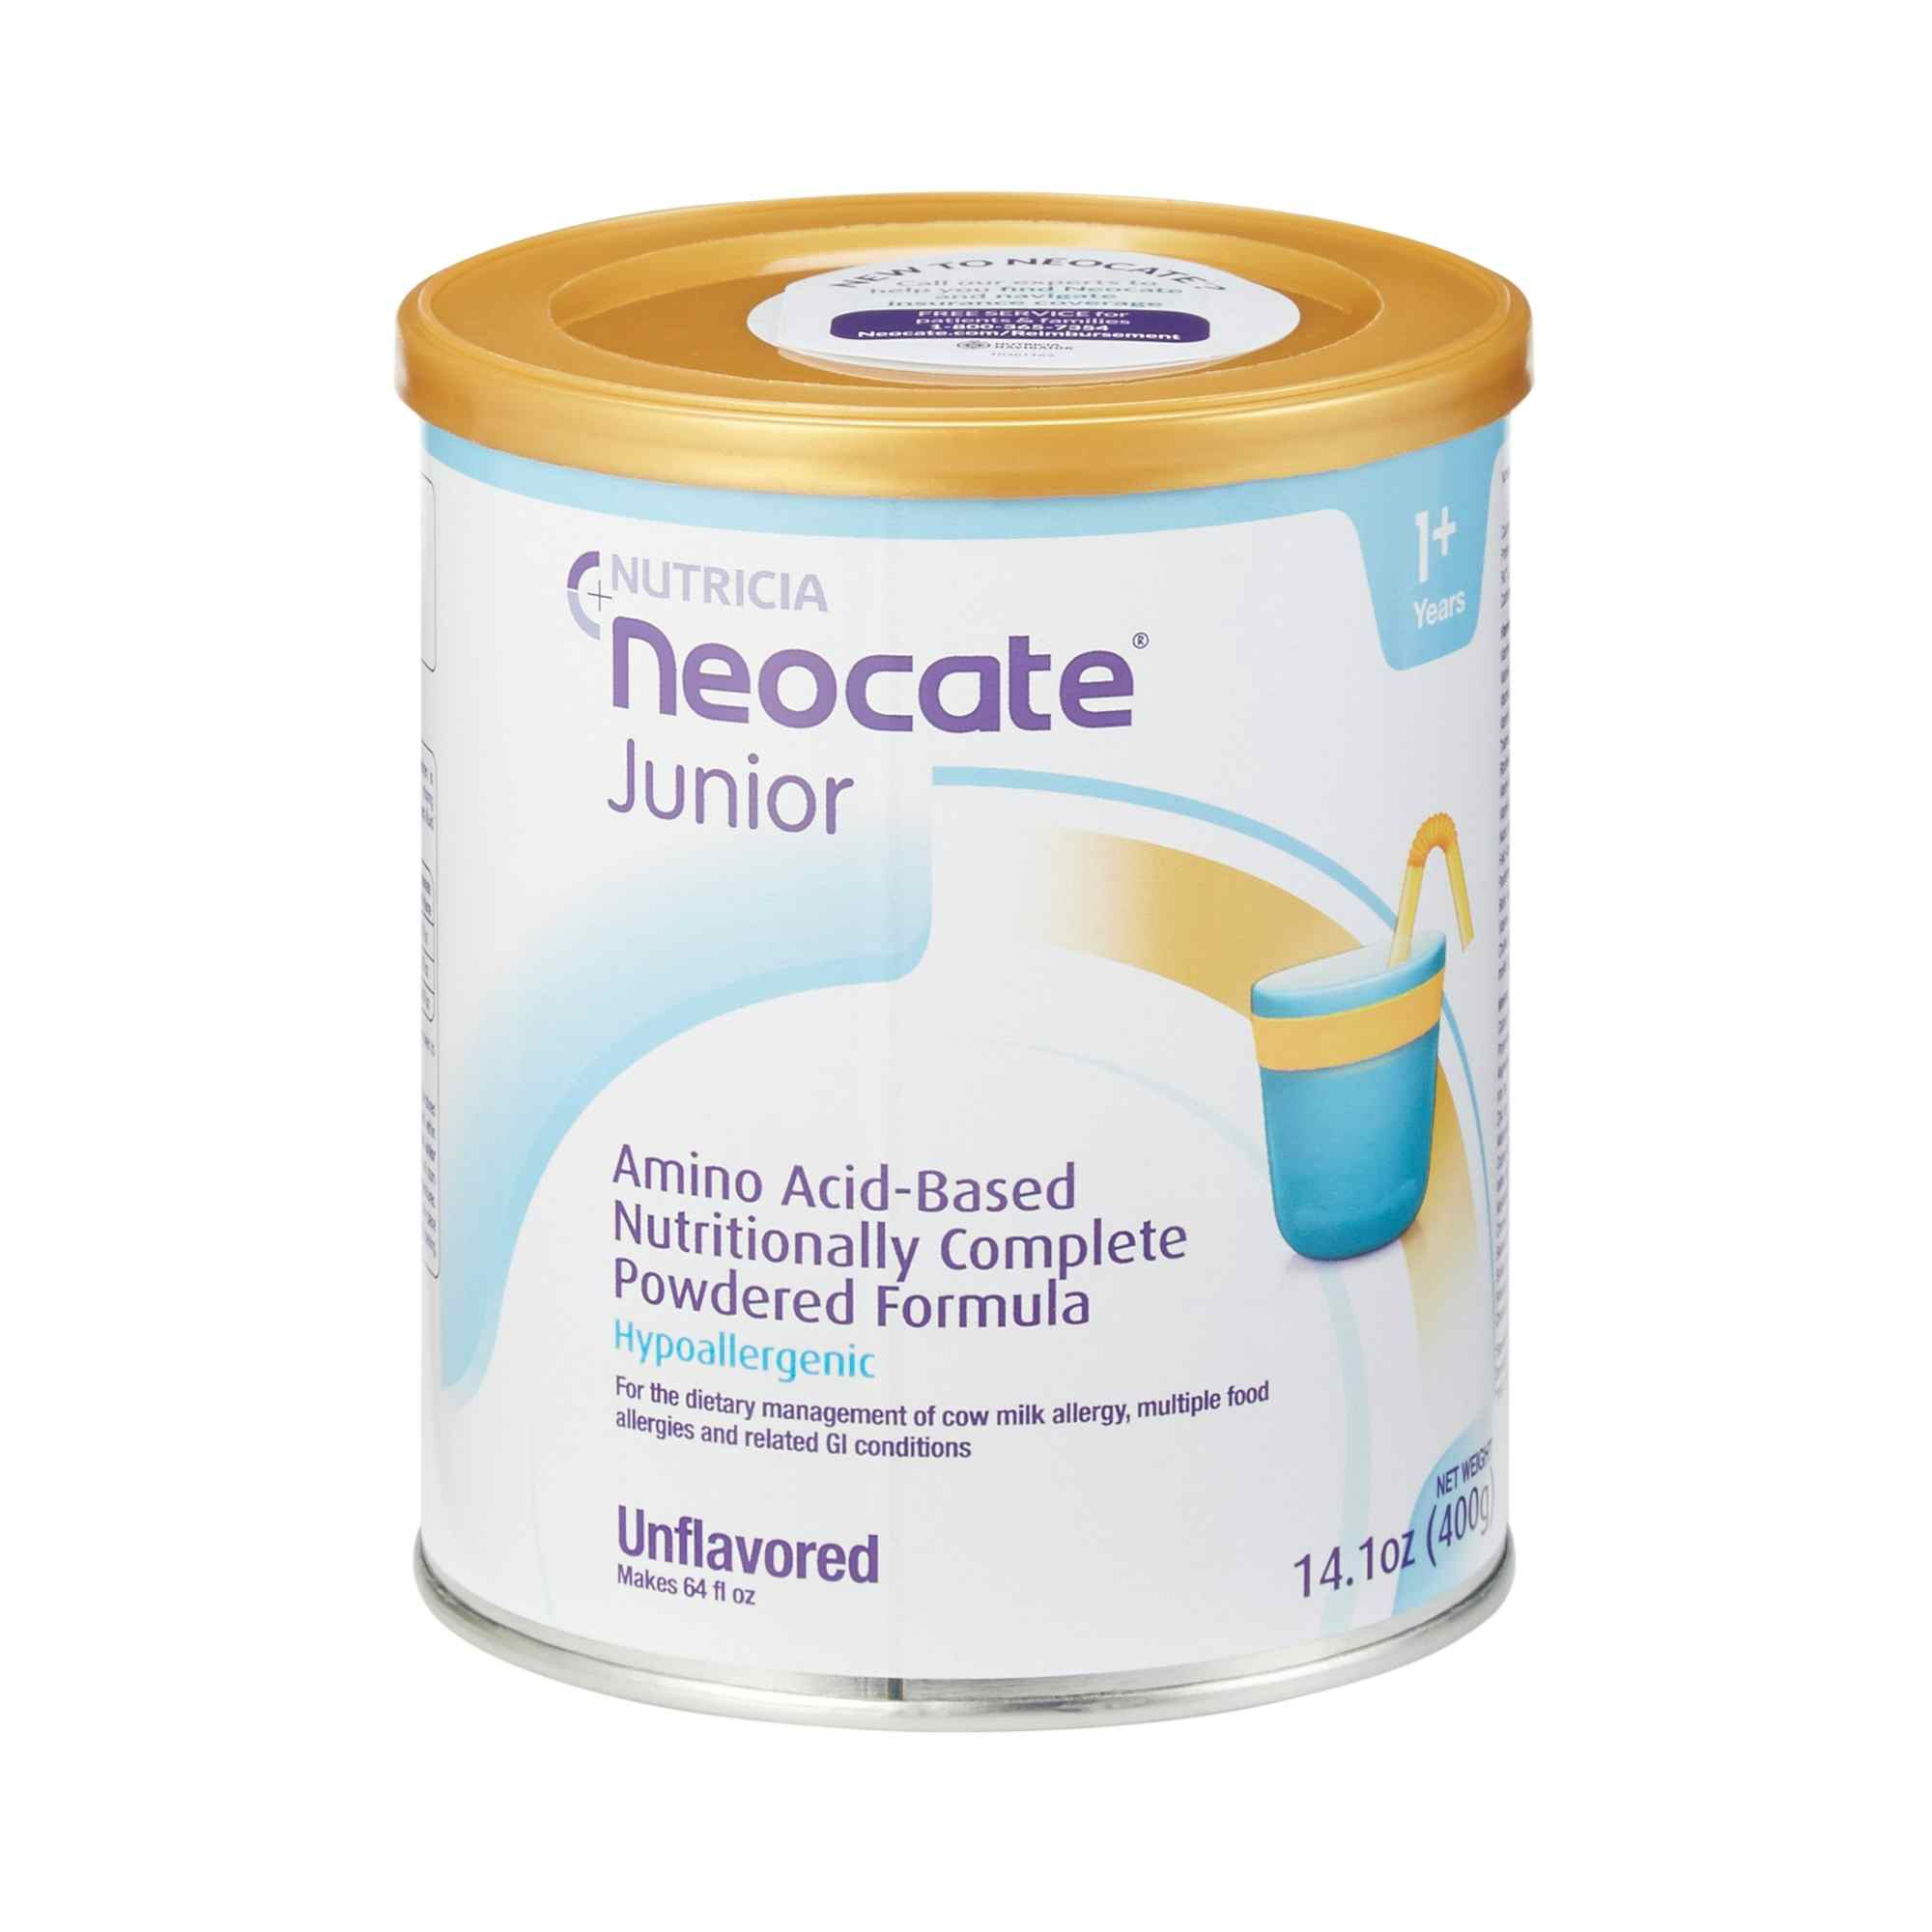 Nutricia Neocate Junior Amino-Acid Based Nutritionally Complete Powdered Formula without Prebiotics, Unflavored, 14.1 oz.